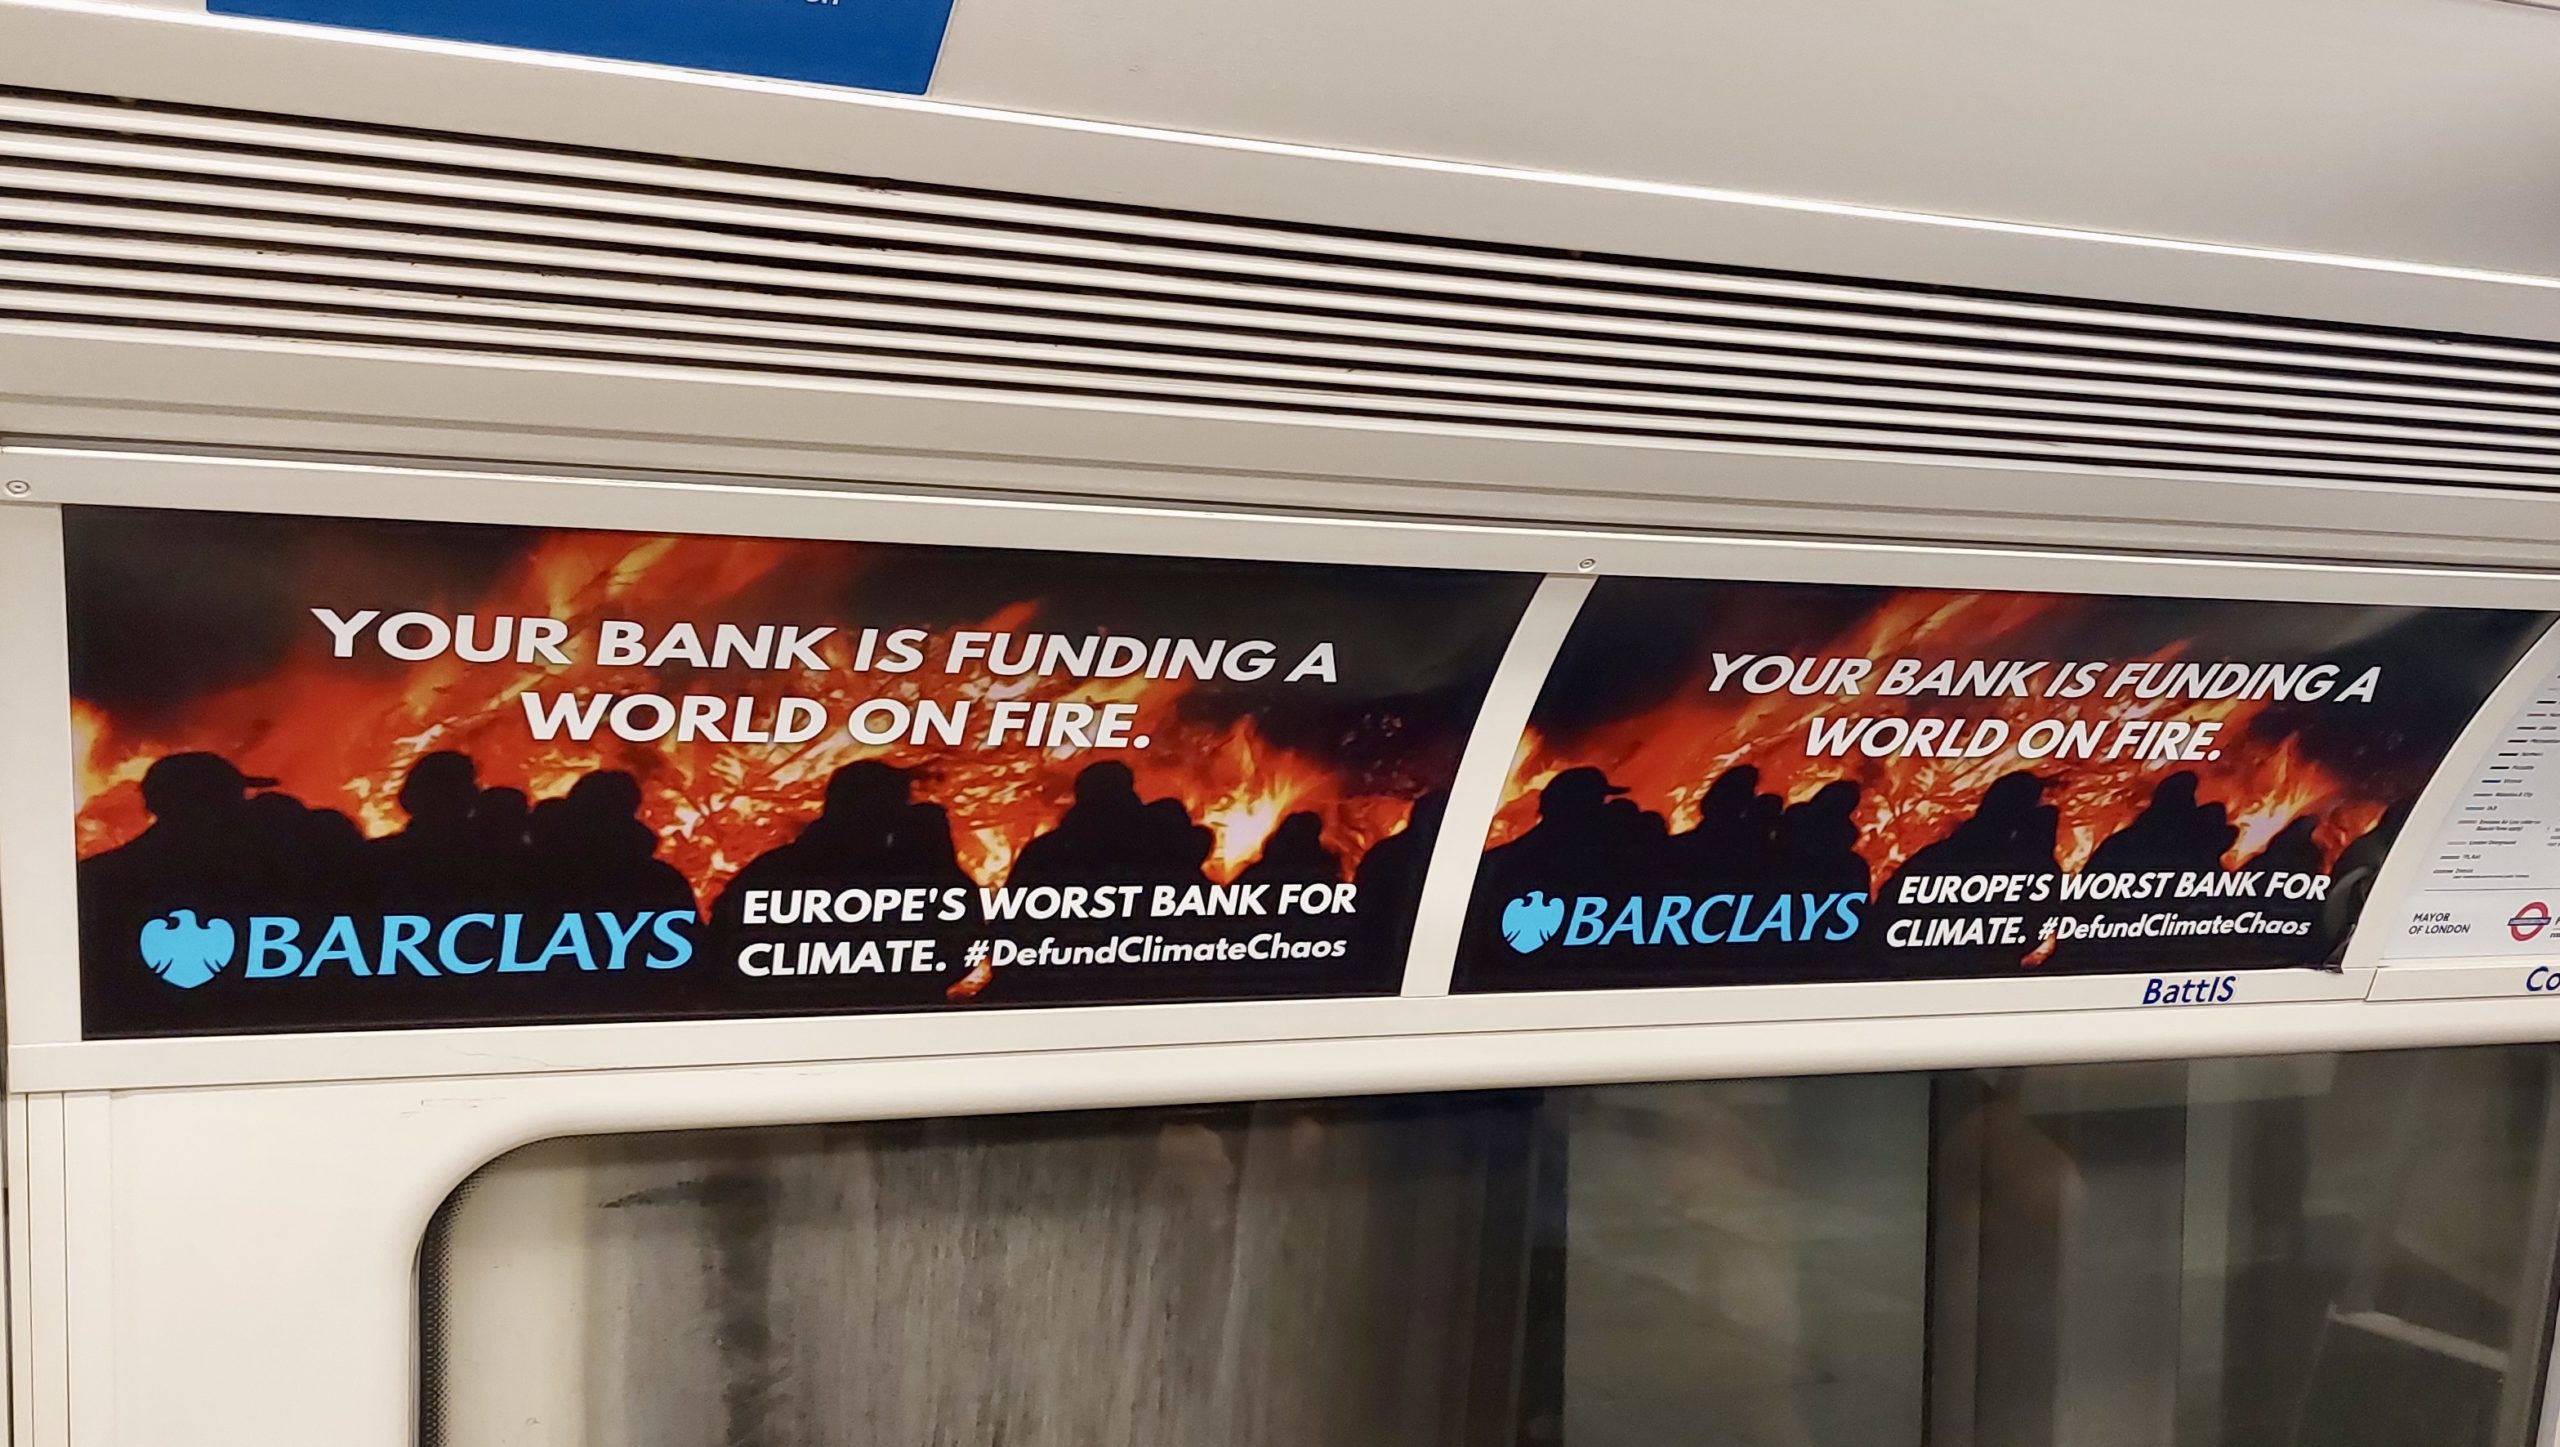 Spoof tube adverts that state "Your banking is funding a world on fire"